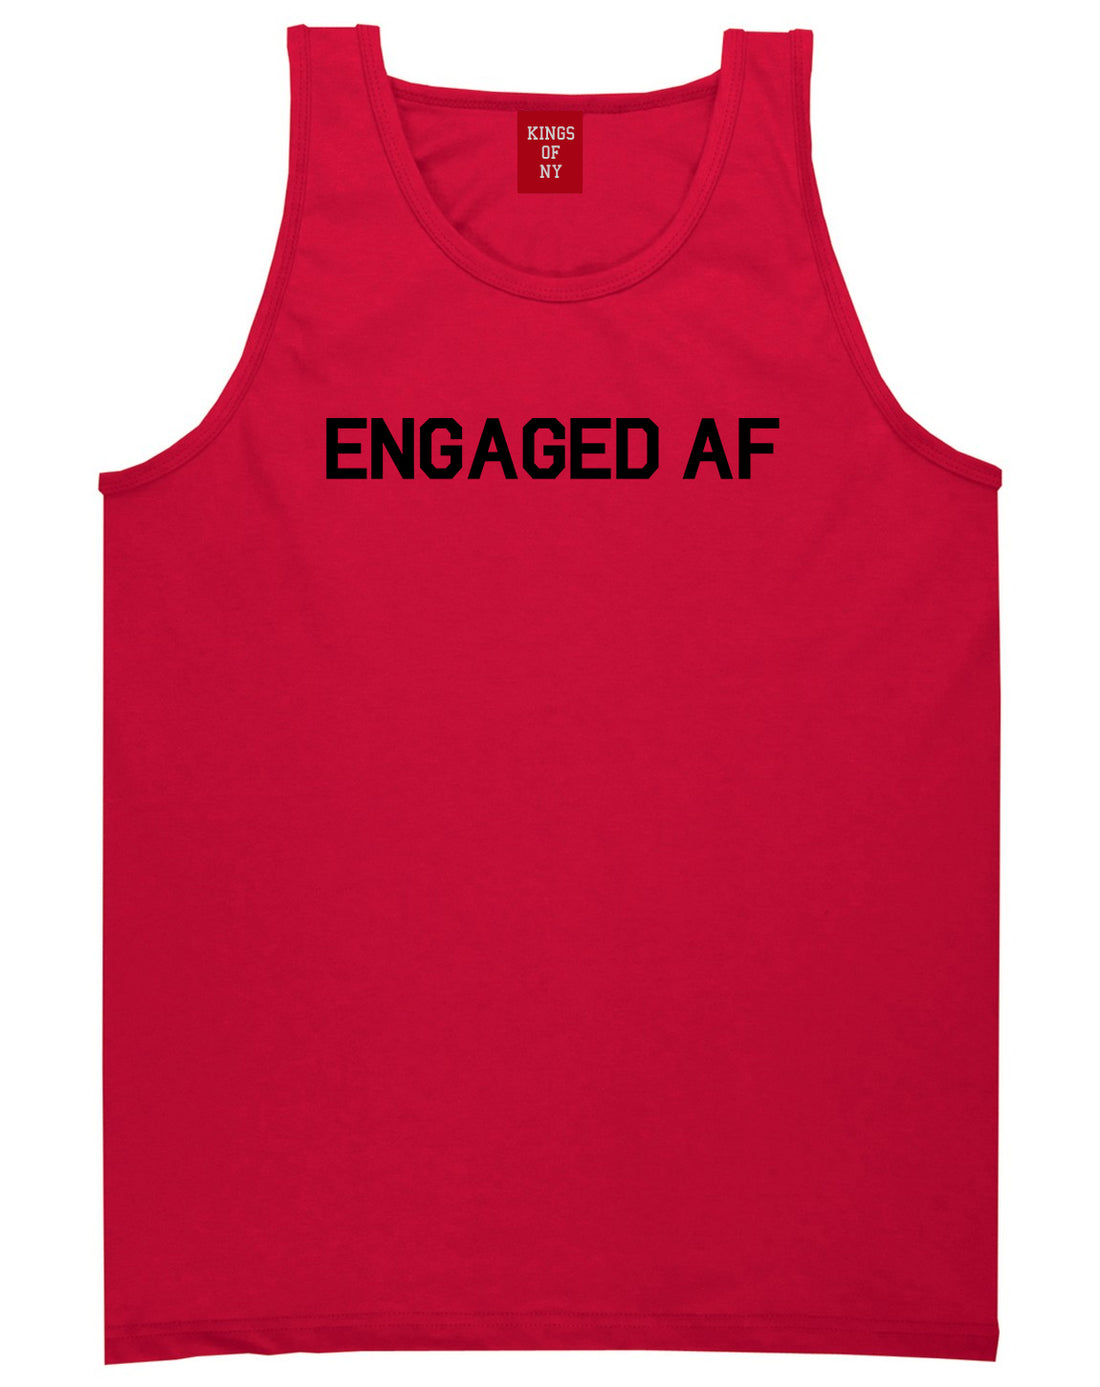 Engaged_AF_Fiance Mens Red Tank Top Shirt by Kings Of NY